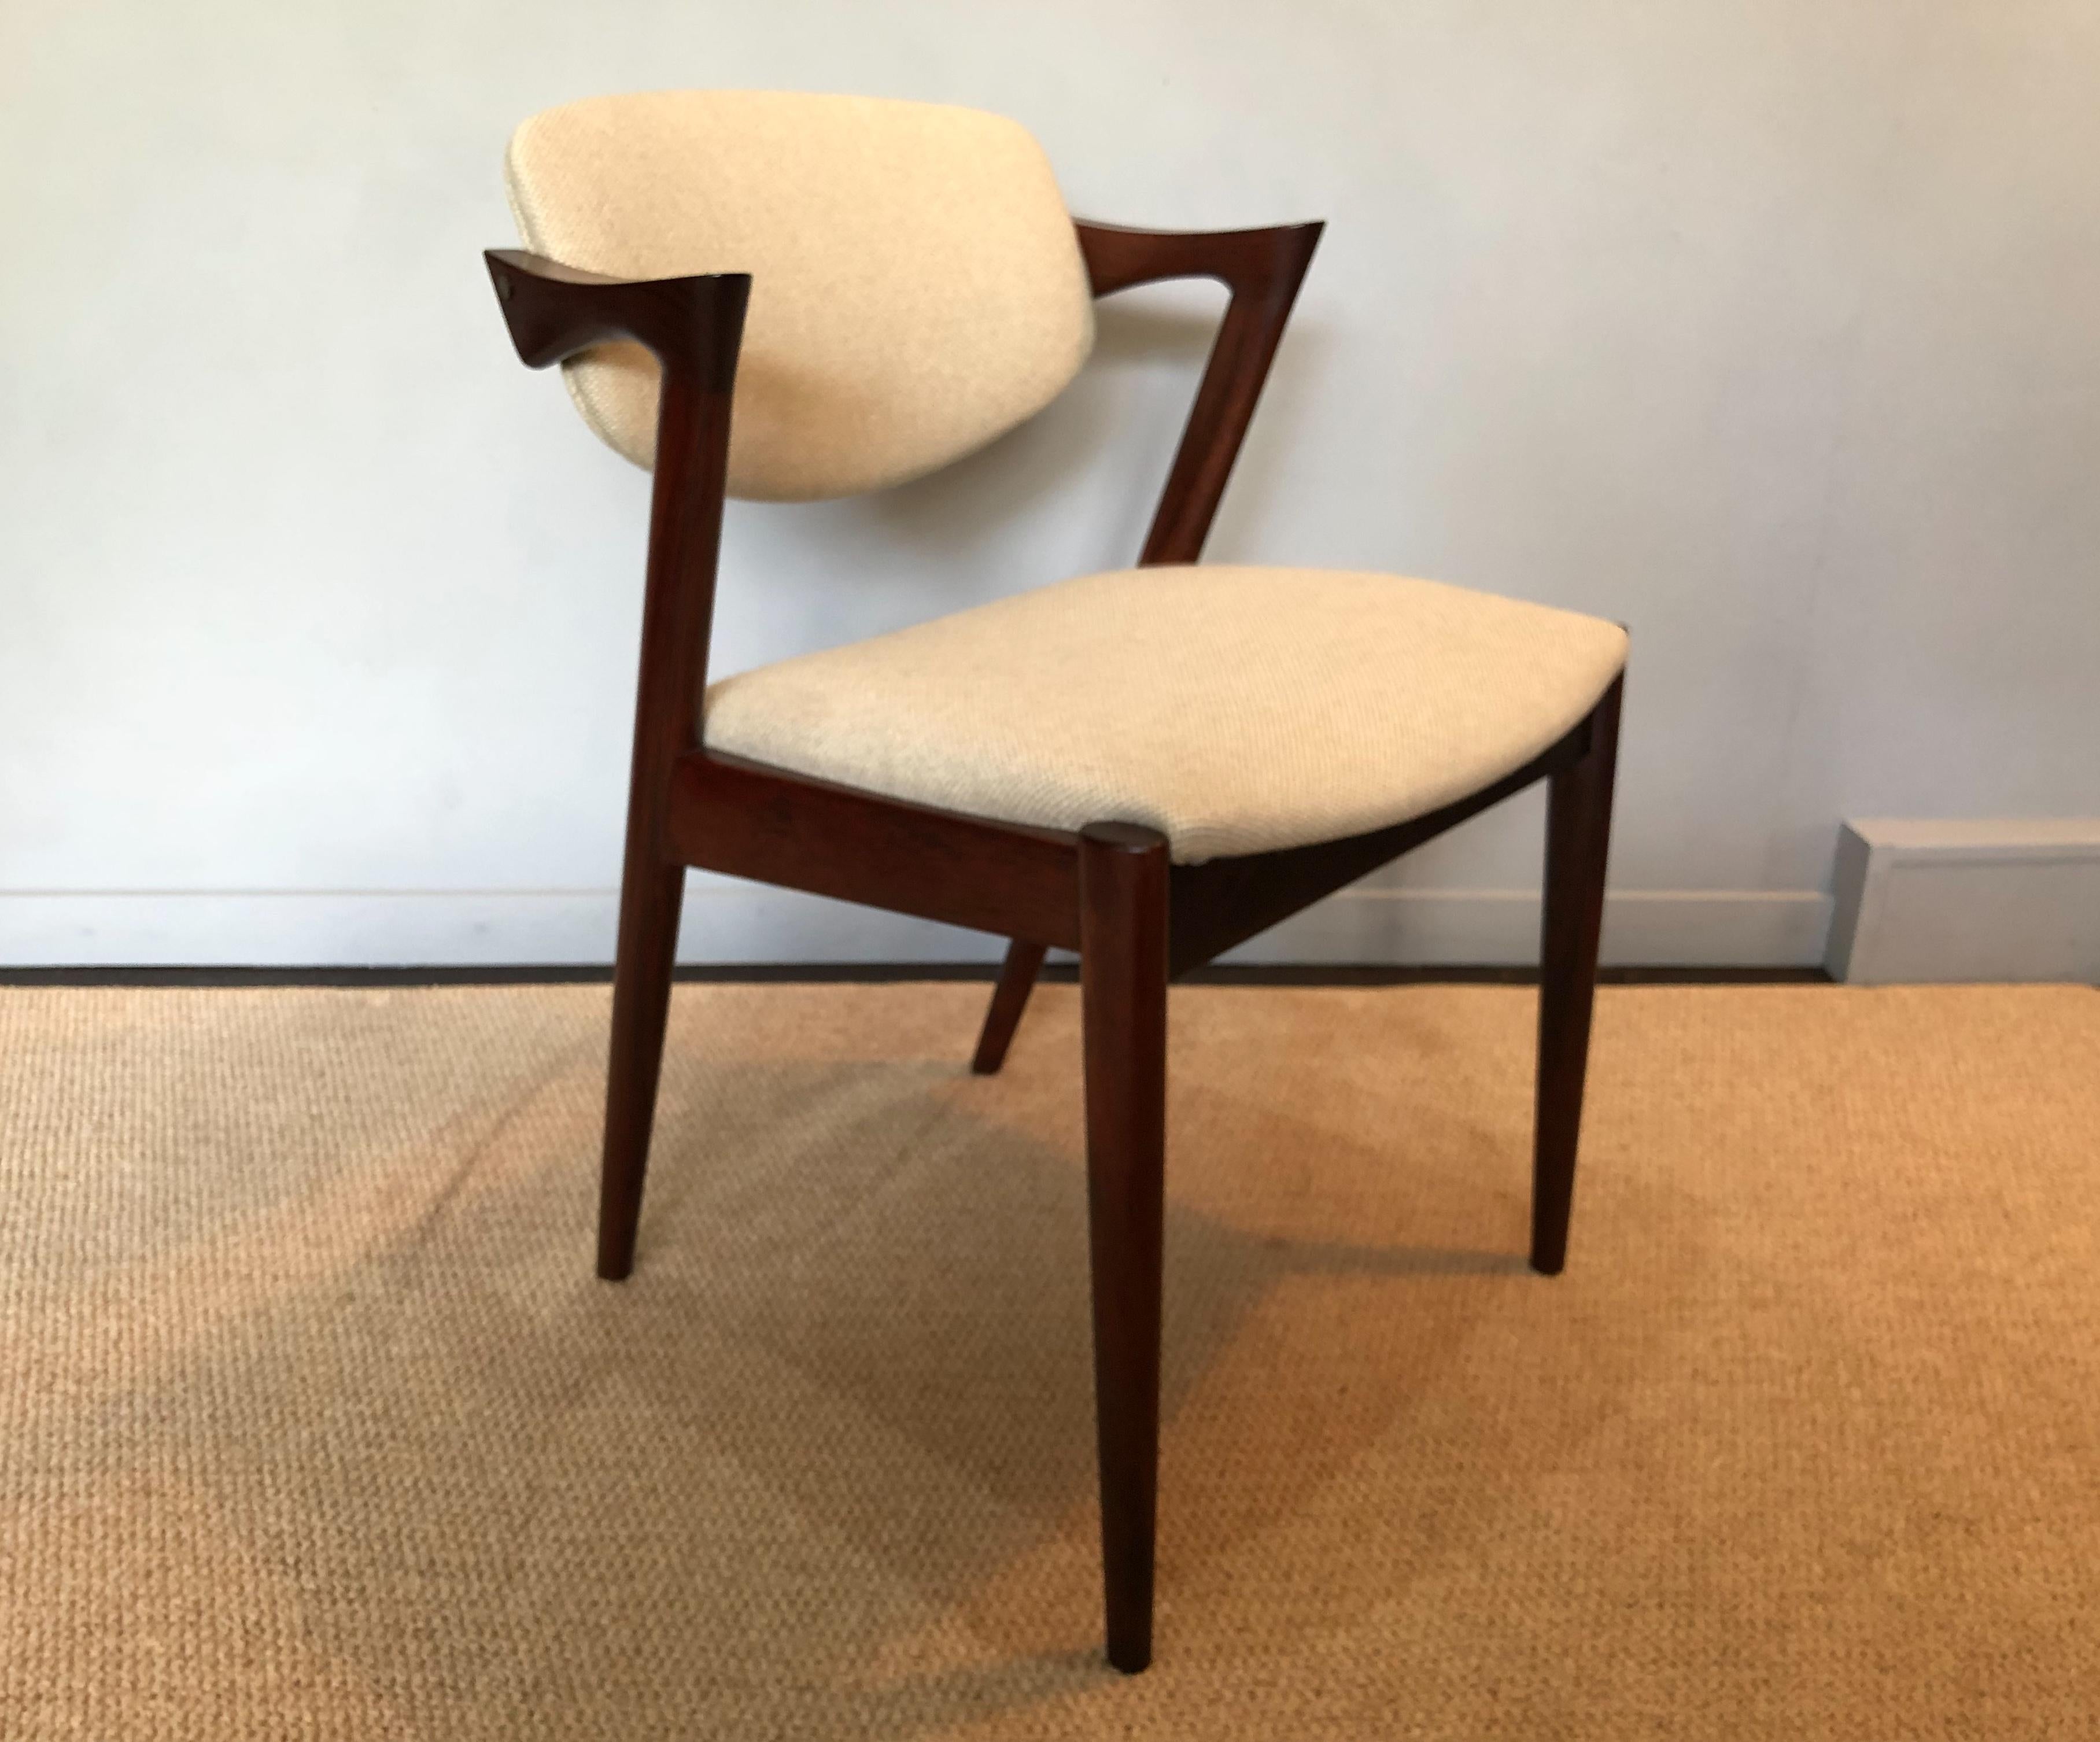 The Classic rosewood model 42 chairs from Kai Kristiansen. Off-white weave upholstery. Custom upholstery is available upon request. Produced circa 1960. The frames have a superb coloring and figuring. In great vintage condition, thoroughly cleaned